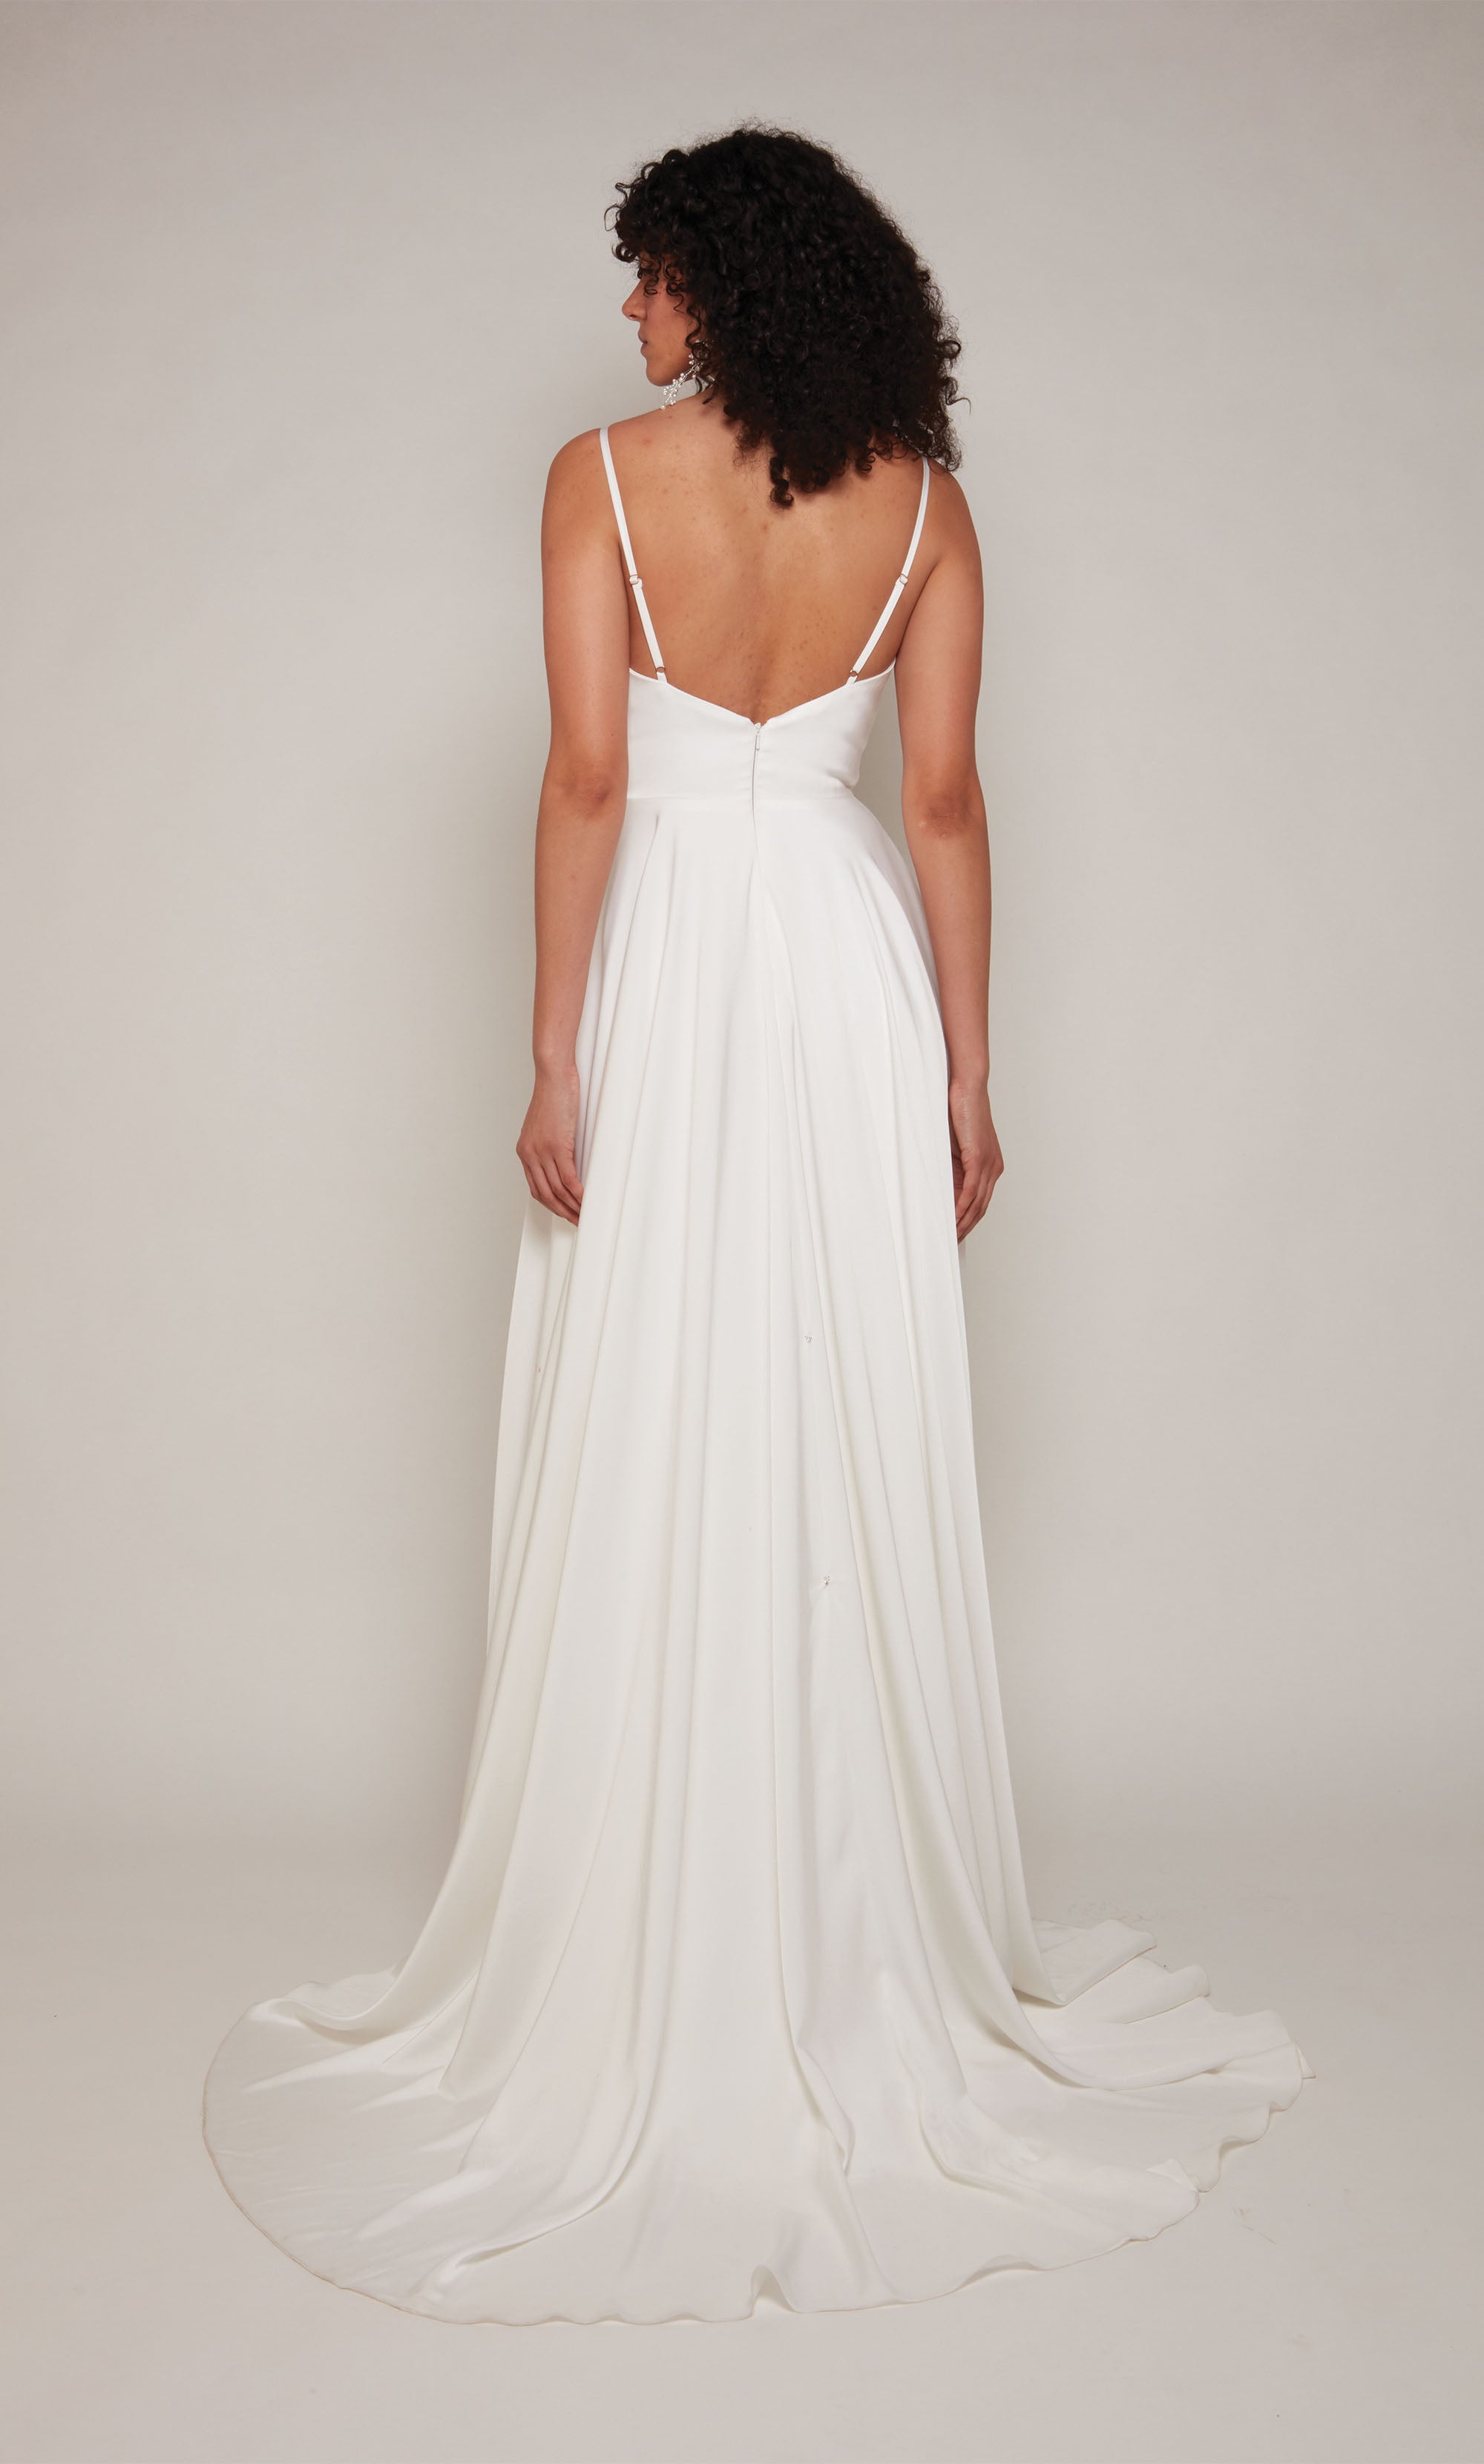 A simple wedding dress in white satin with an A-line skirt, V-shaped cowl neckline, and adjustable spaghetti straps.